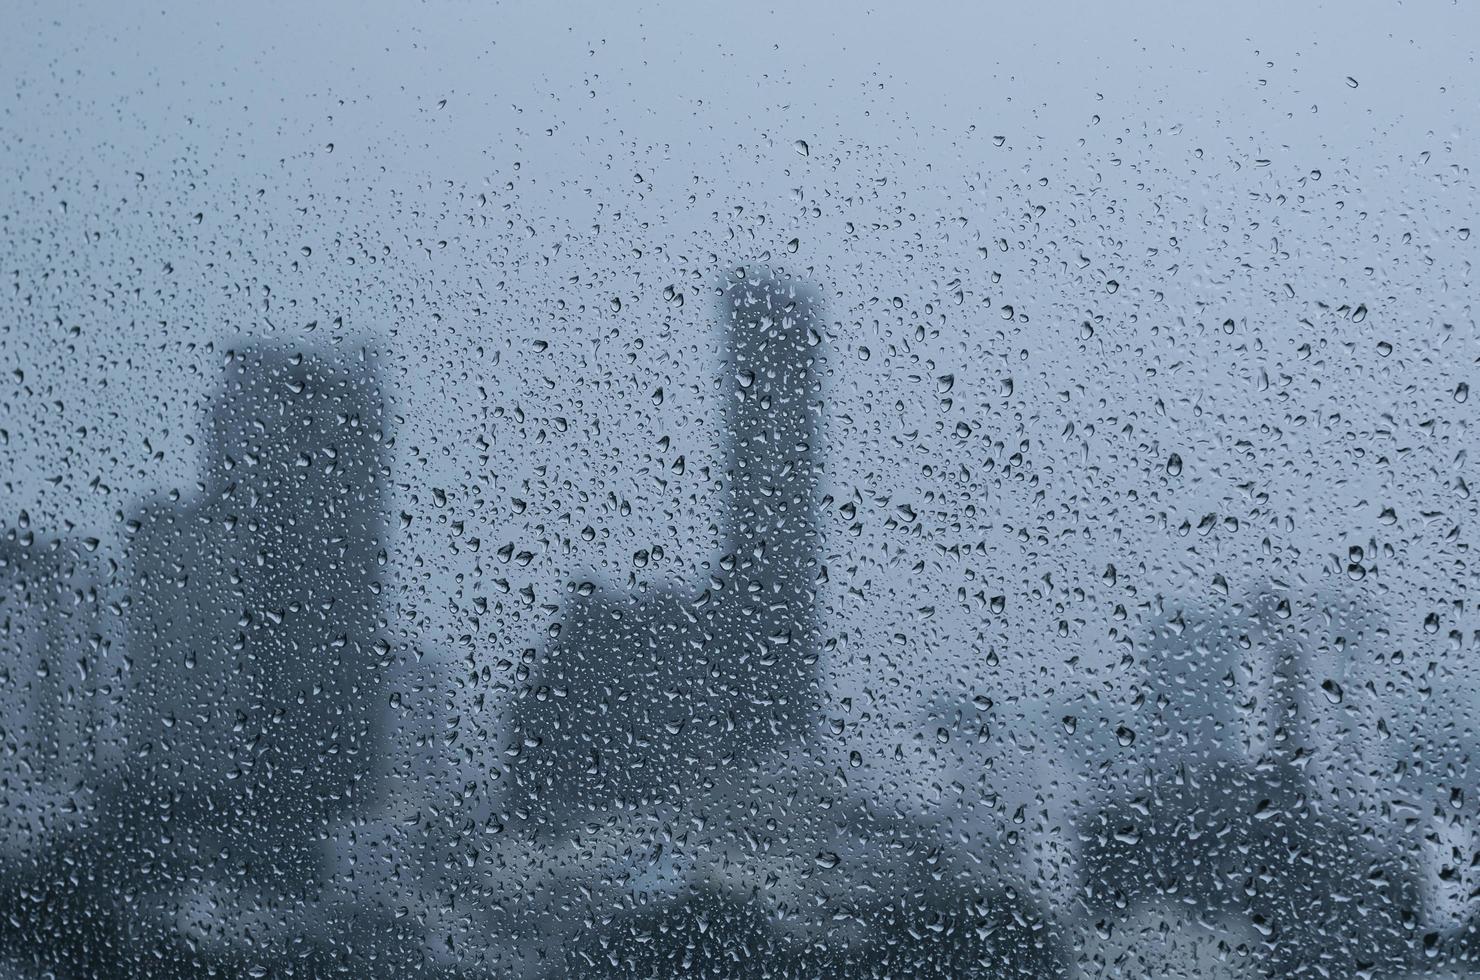 Rain drop on glass window at day time in monsoon season with blurred city buildings background. photo